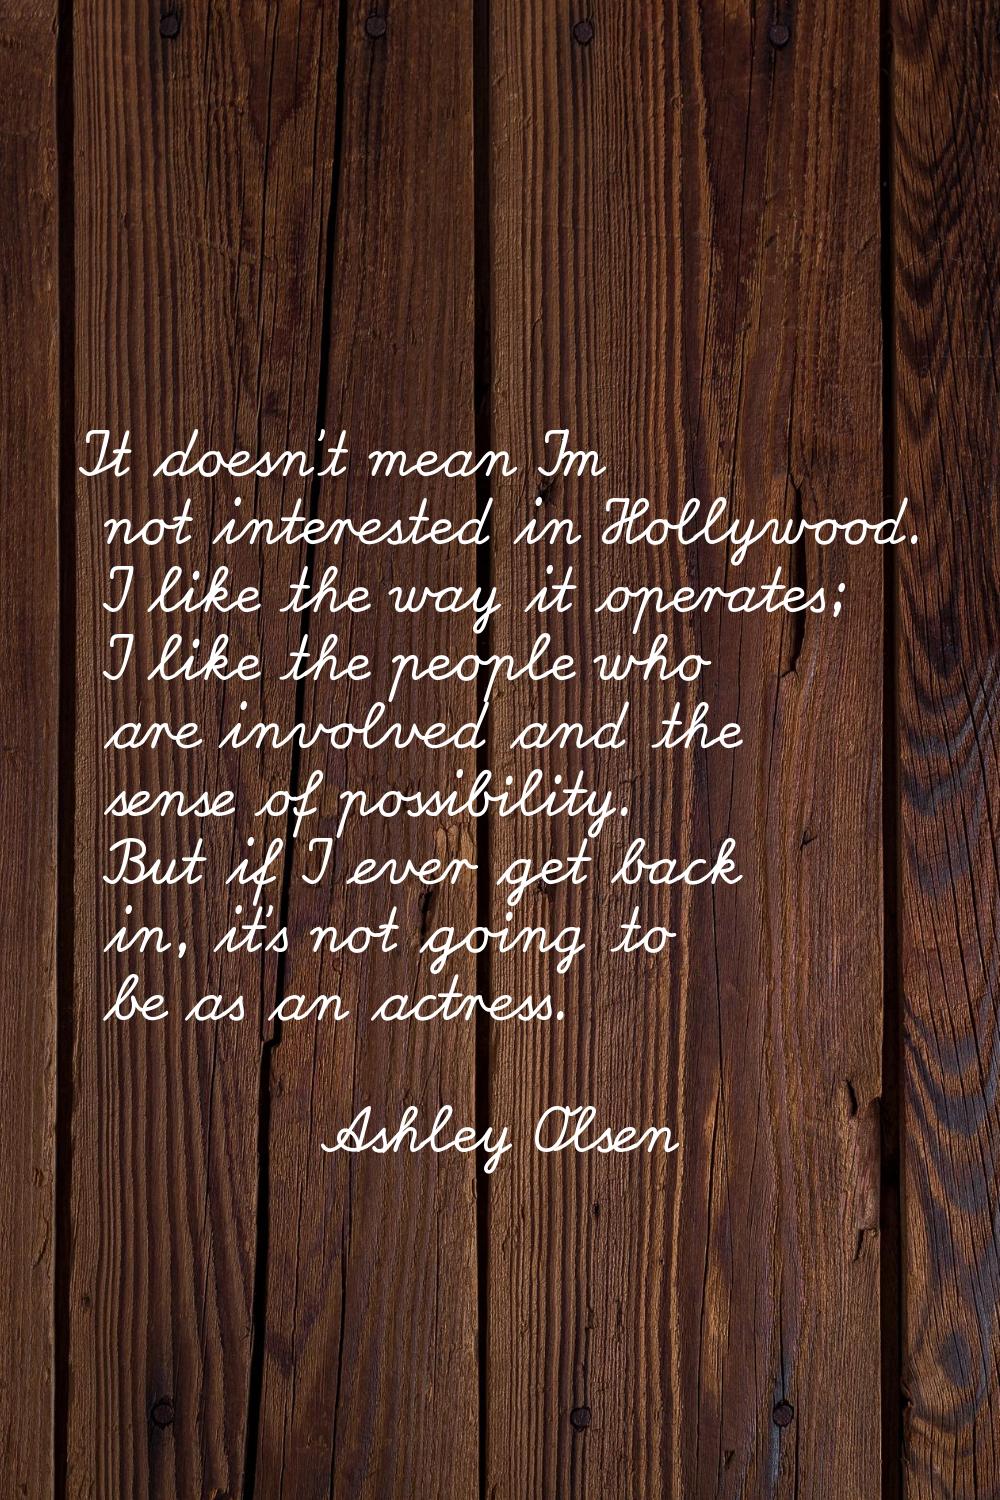 It doesn't mean I'm not interested in Hollywood. I like the way it operates; I like the people who 